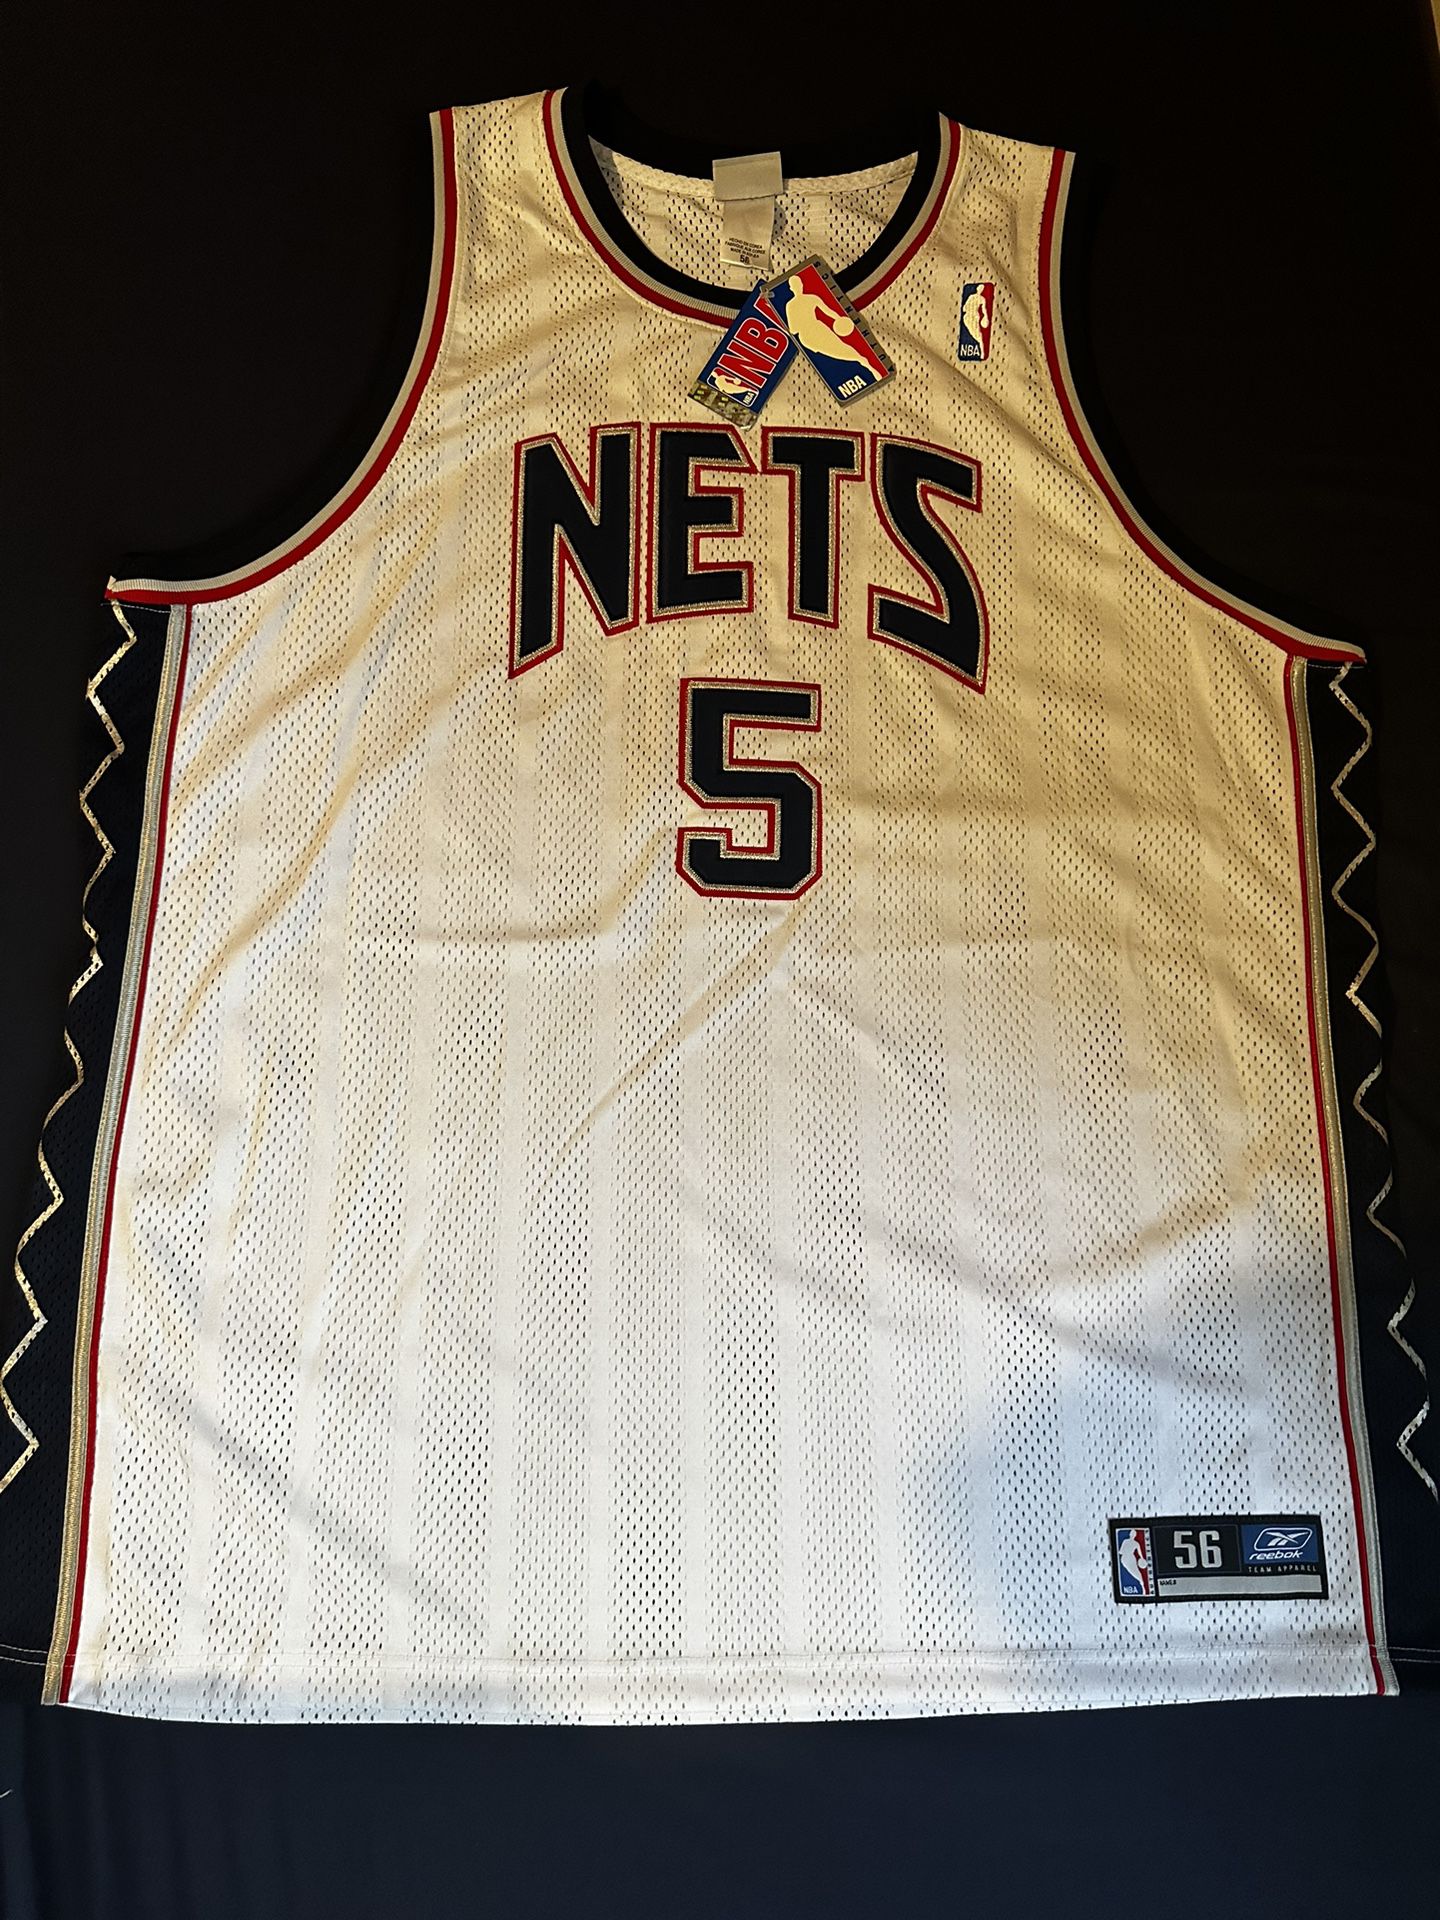 Jason Kidd Jersey for Sale in New York, NY - OfferUp